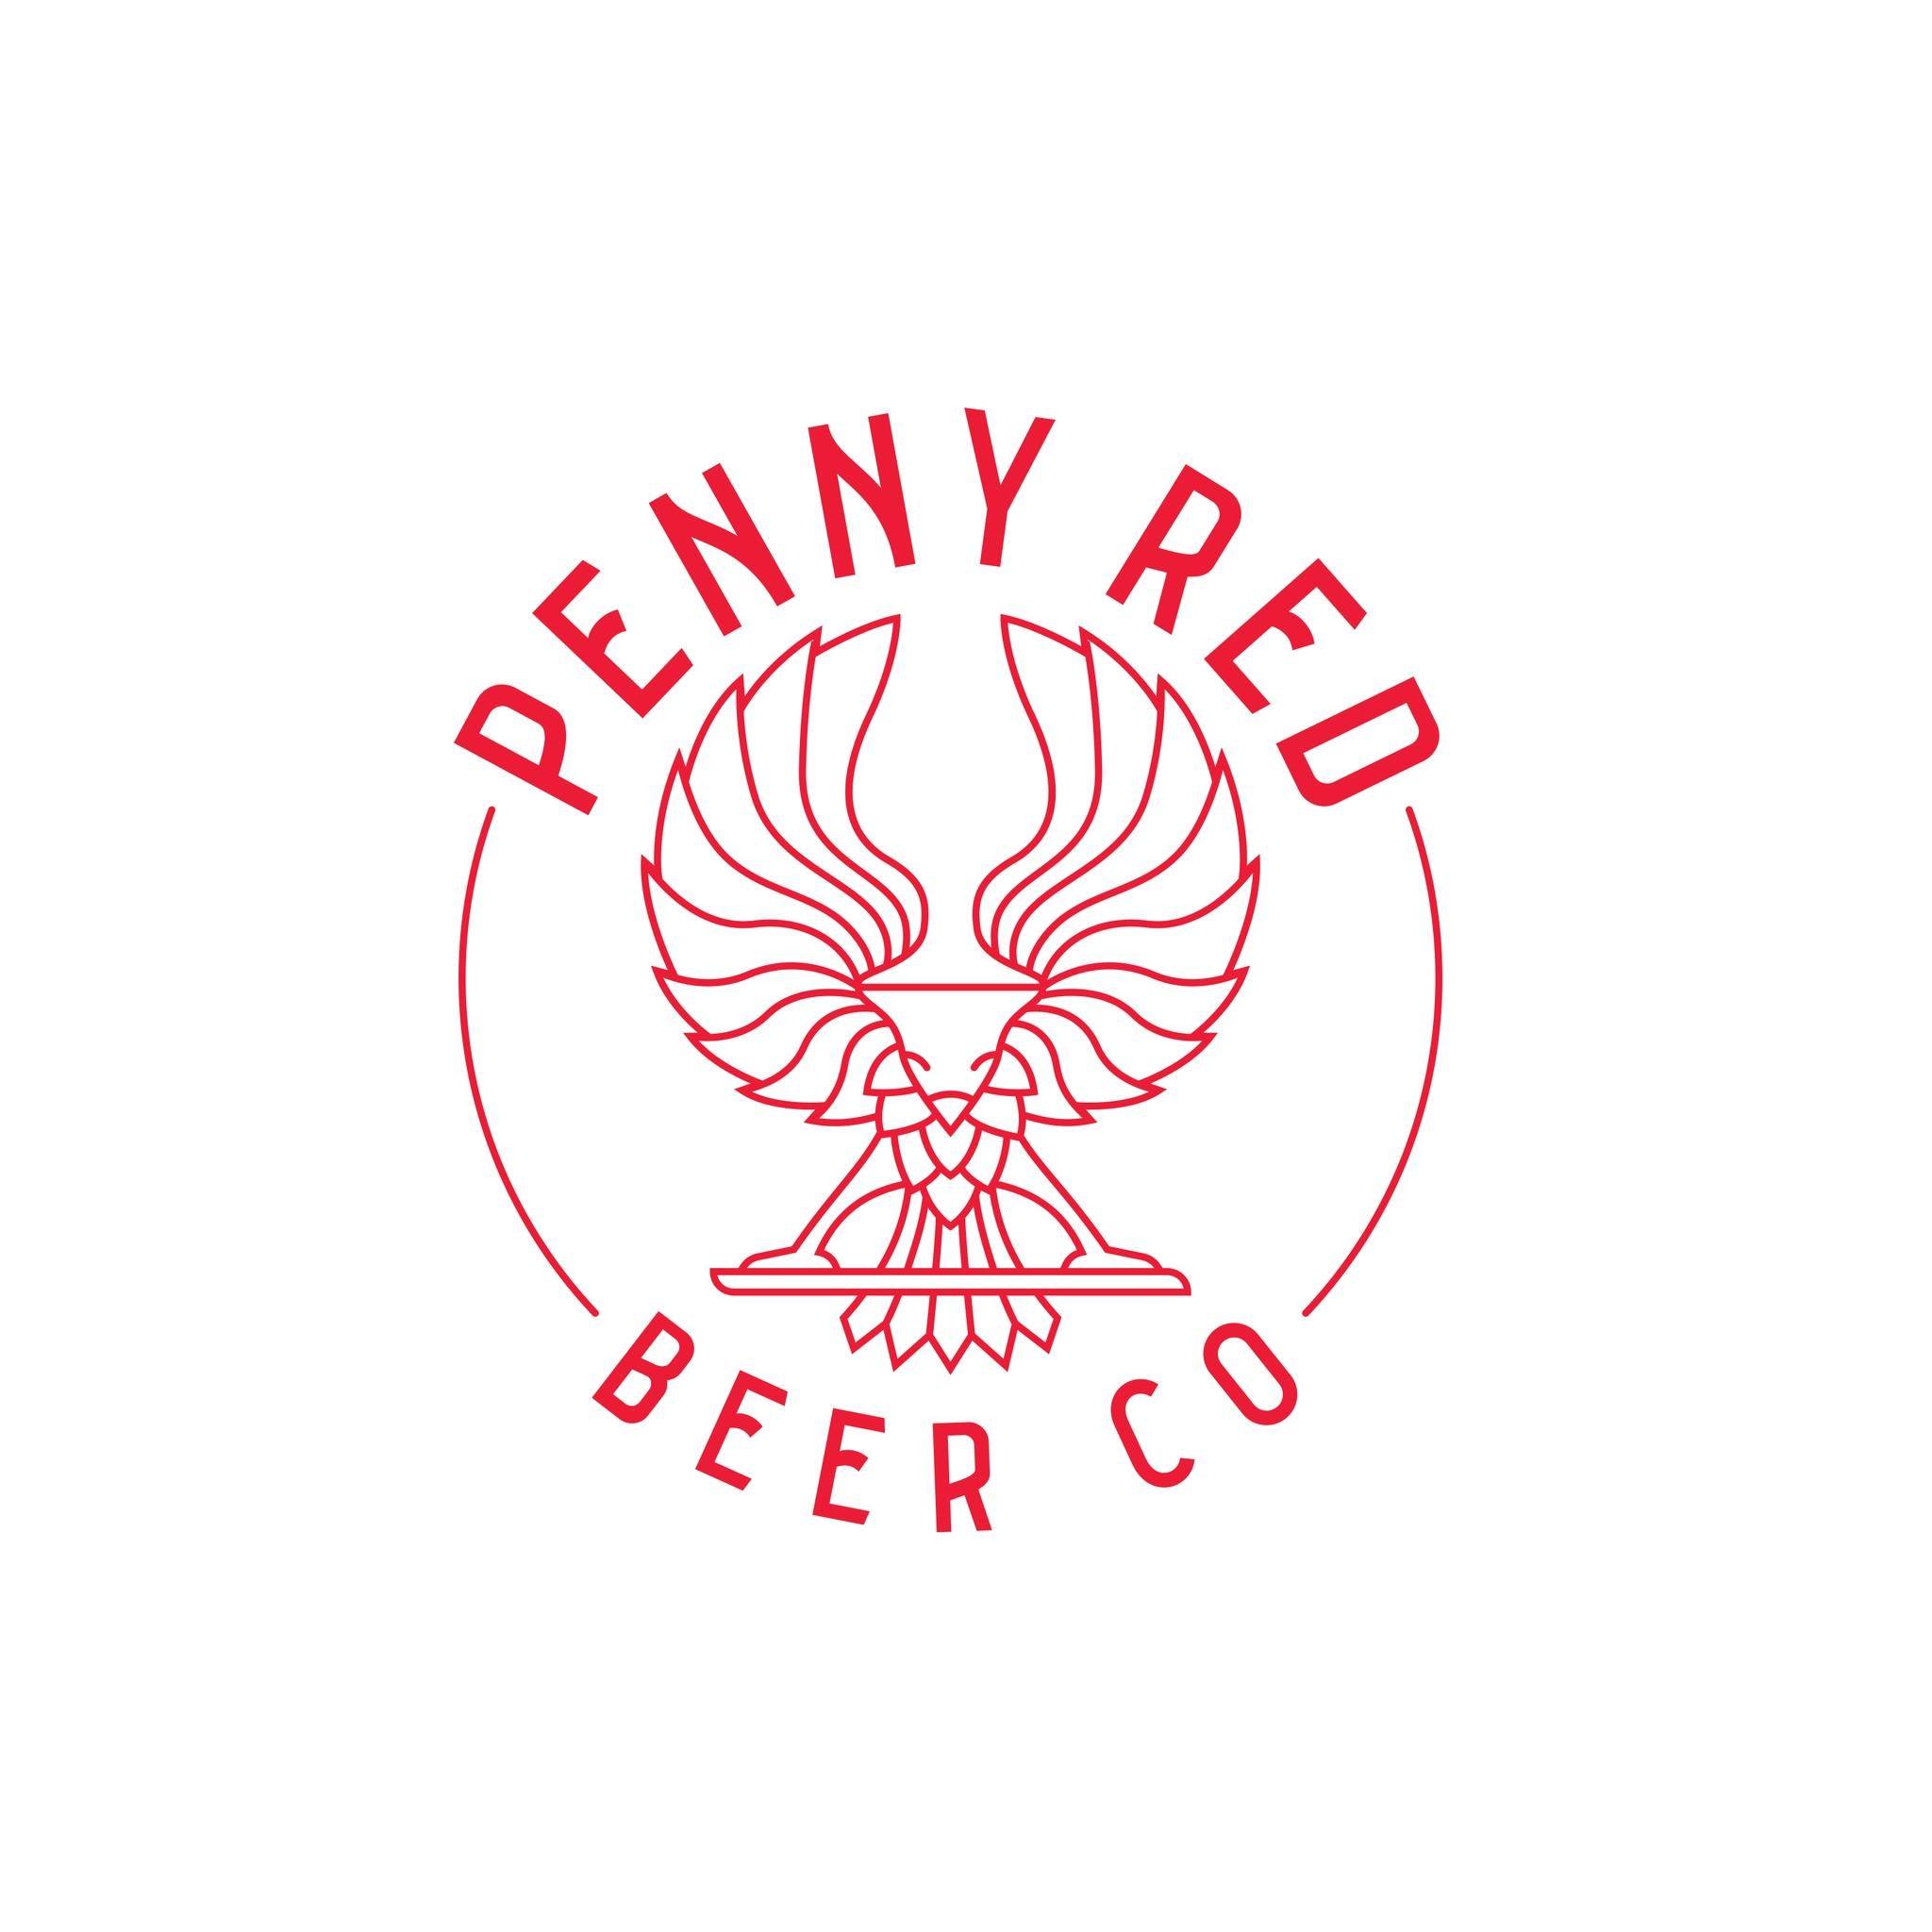 Penny Red Beer Co